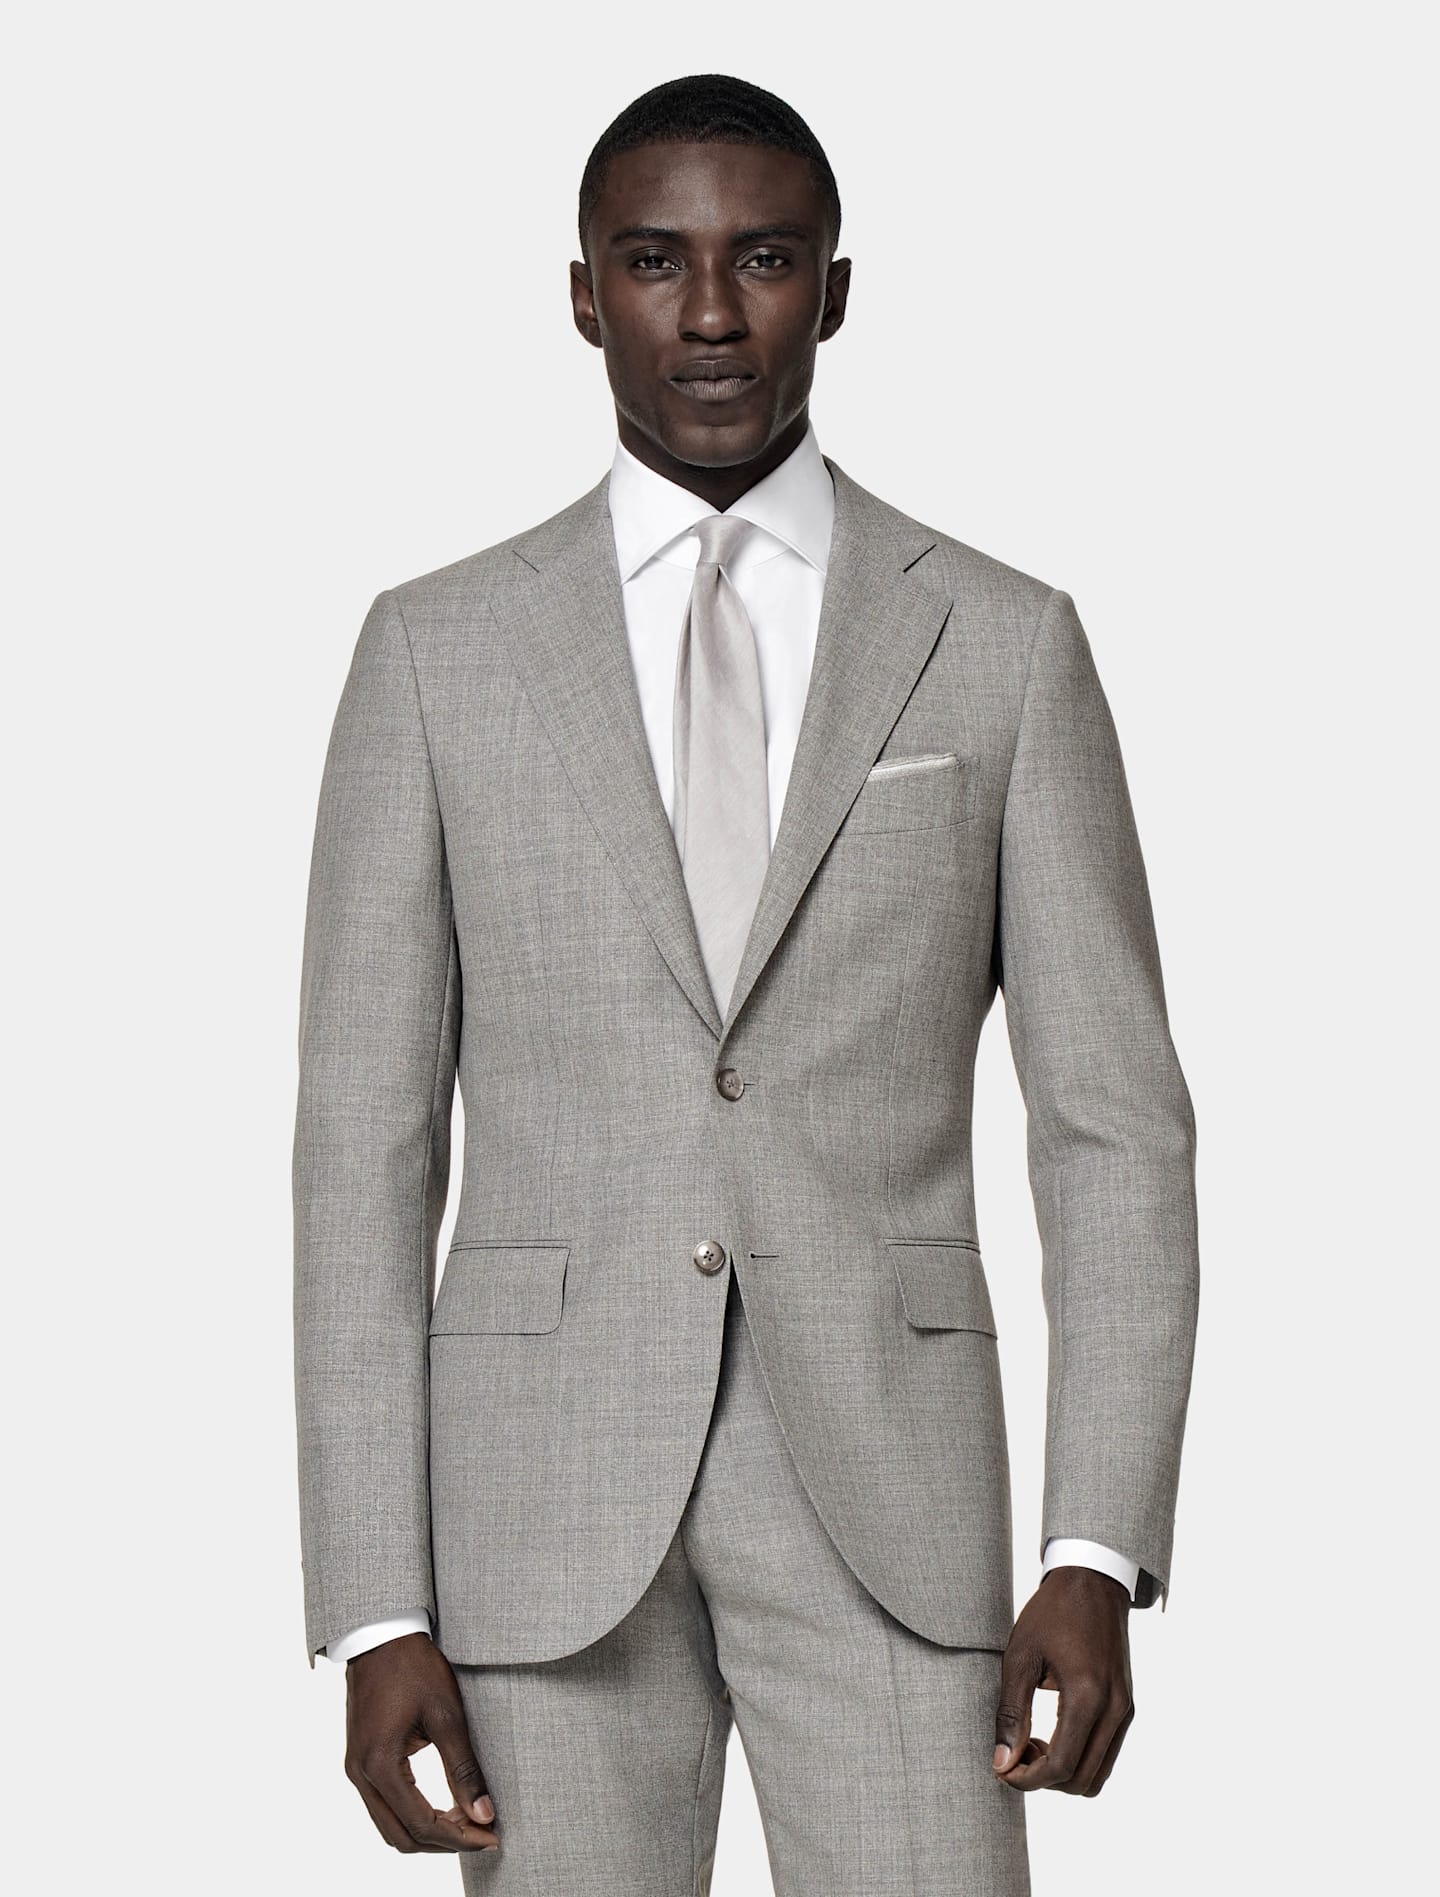 Grey single-breasted suit with white shirt and grey silk tie.